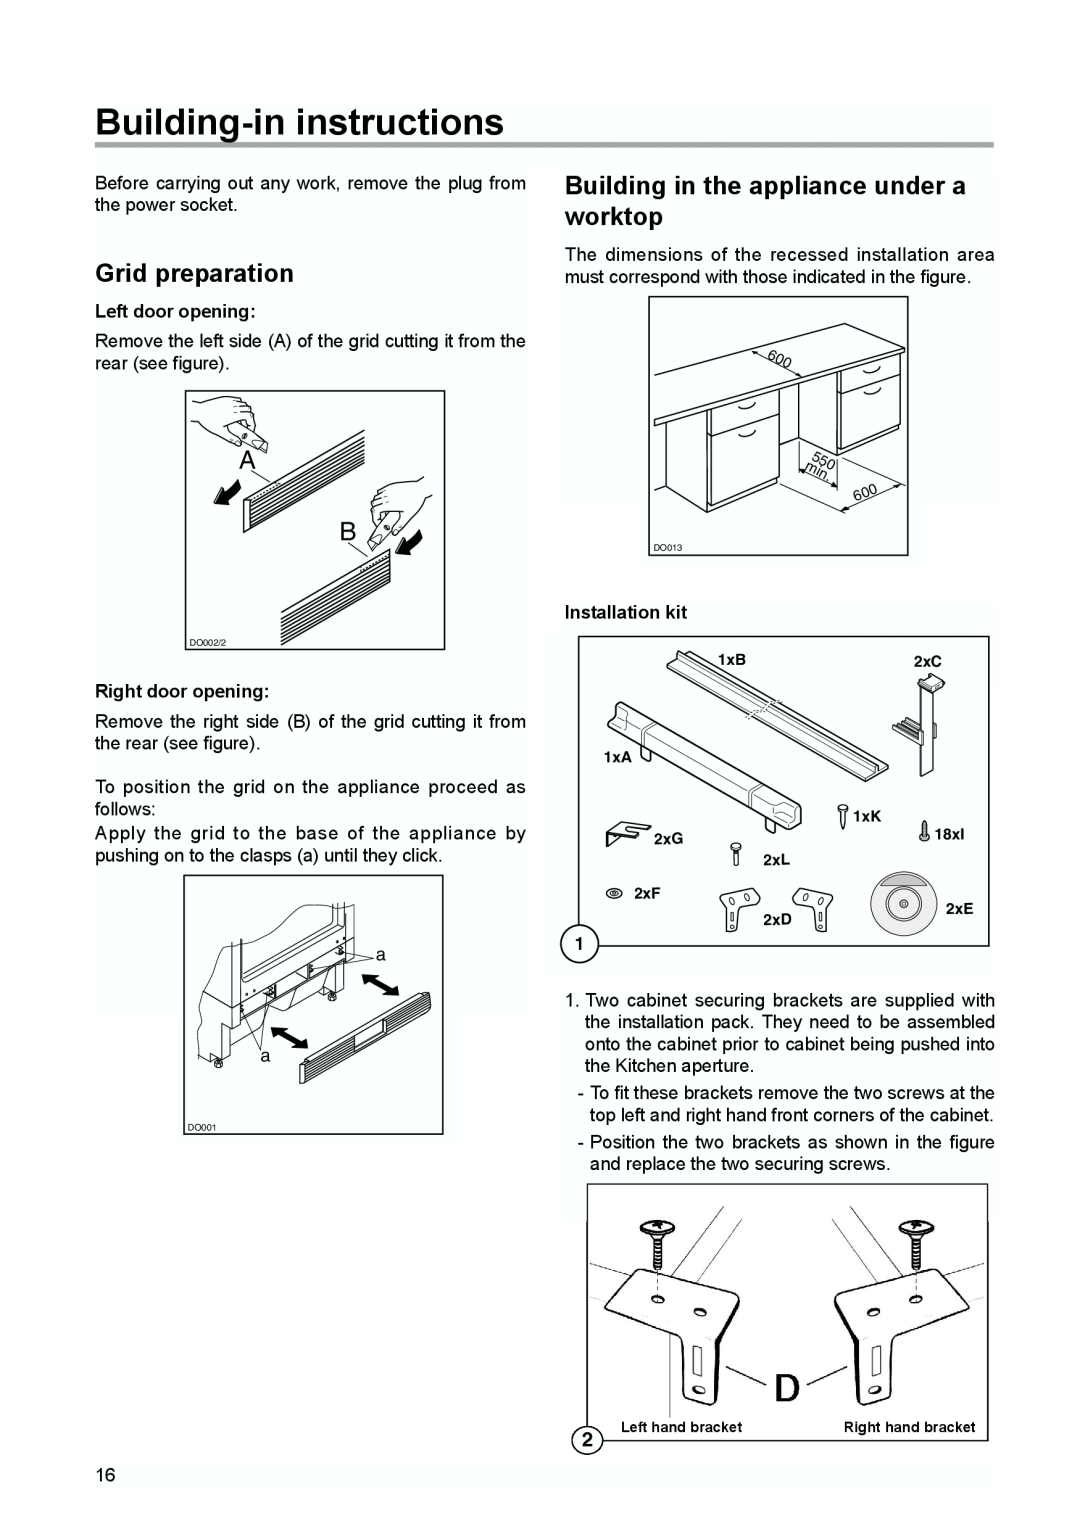 Tricity Bendix TBUR 120 Building-in instructions, Grid preparation, Building in the appliance under a worktop 